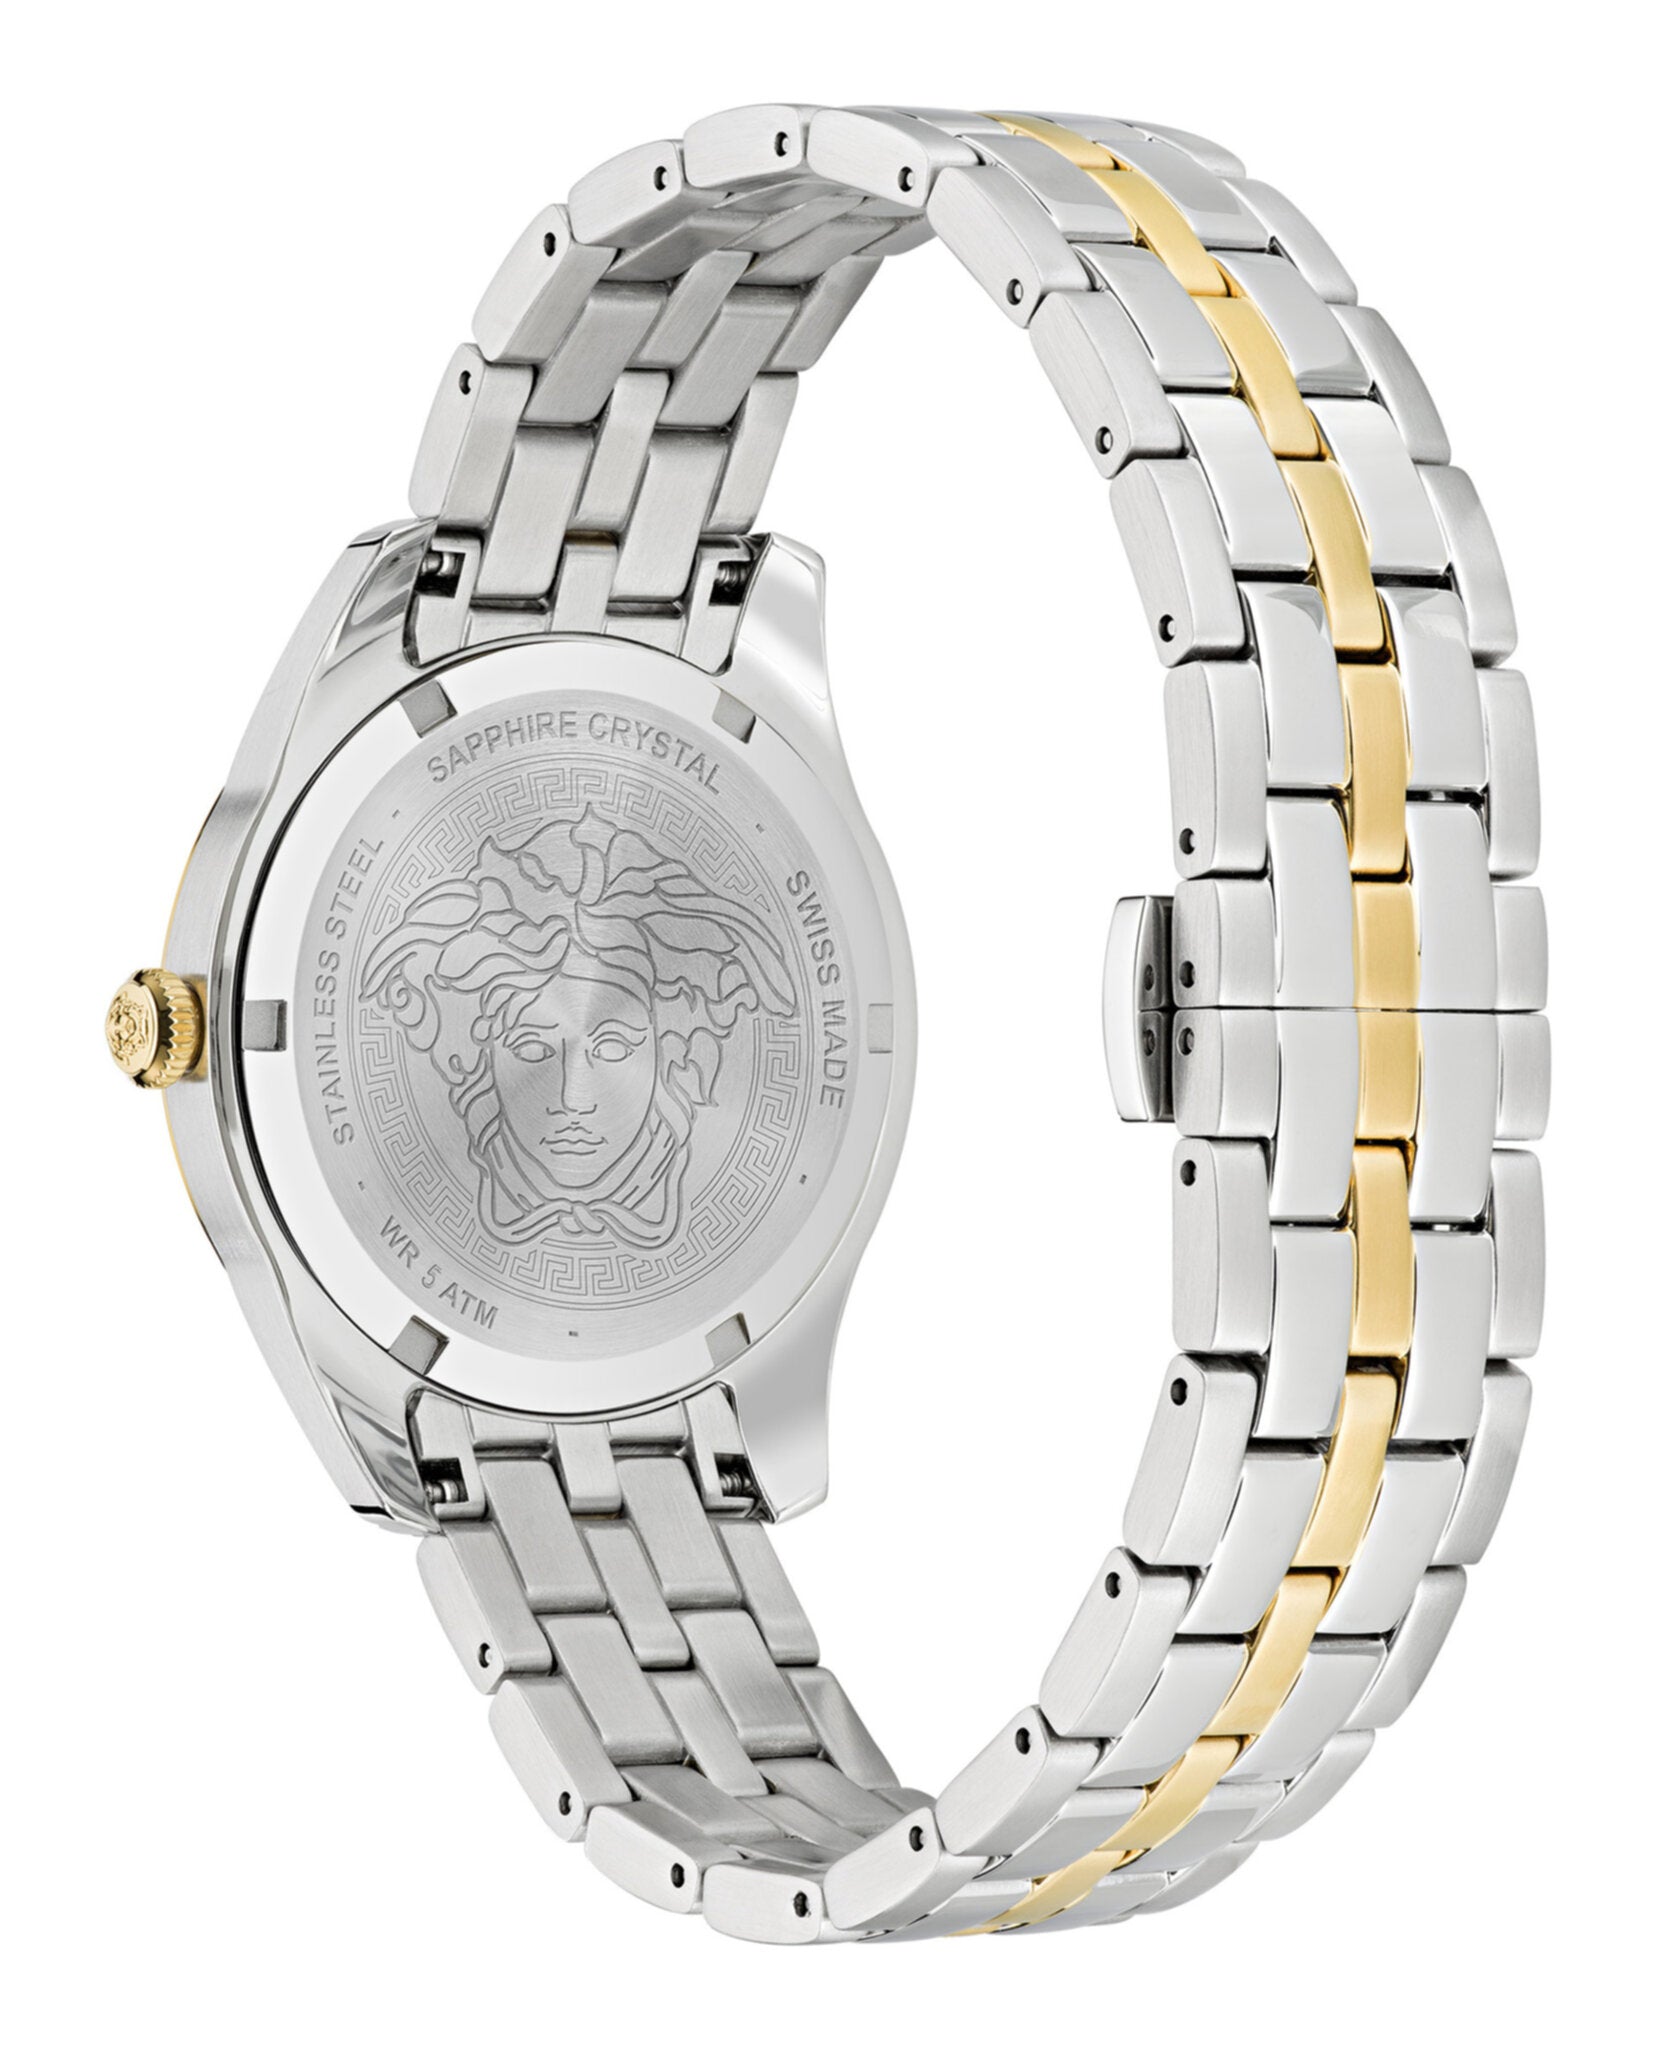 Madaluxe – Womens MadaLuxe Versace Time Time | Watches Greca Time